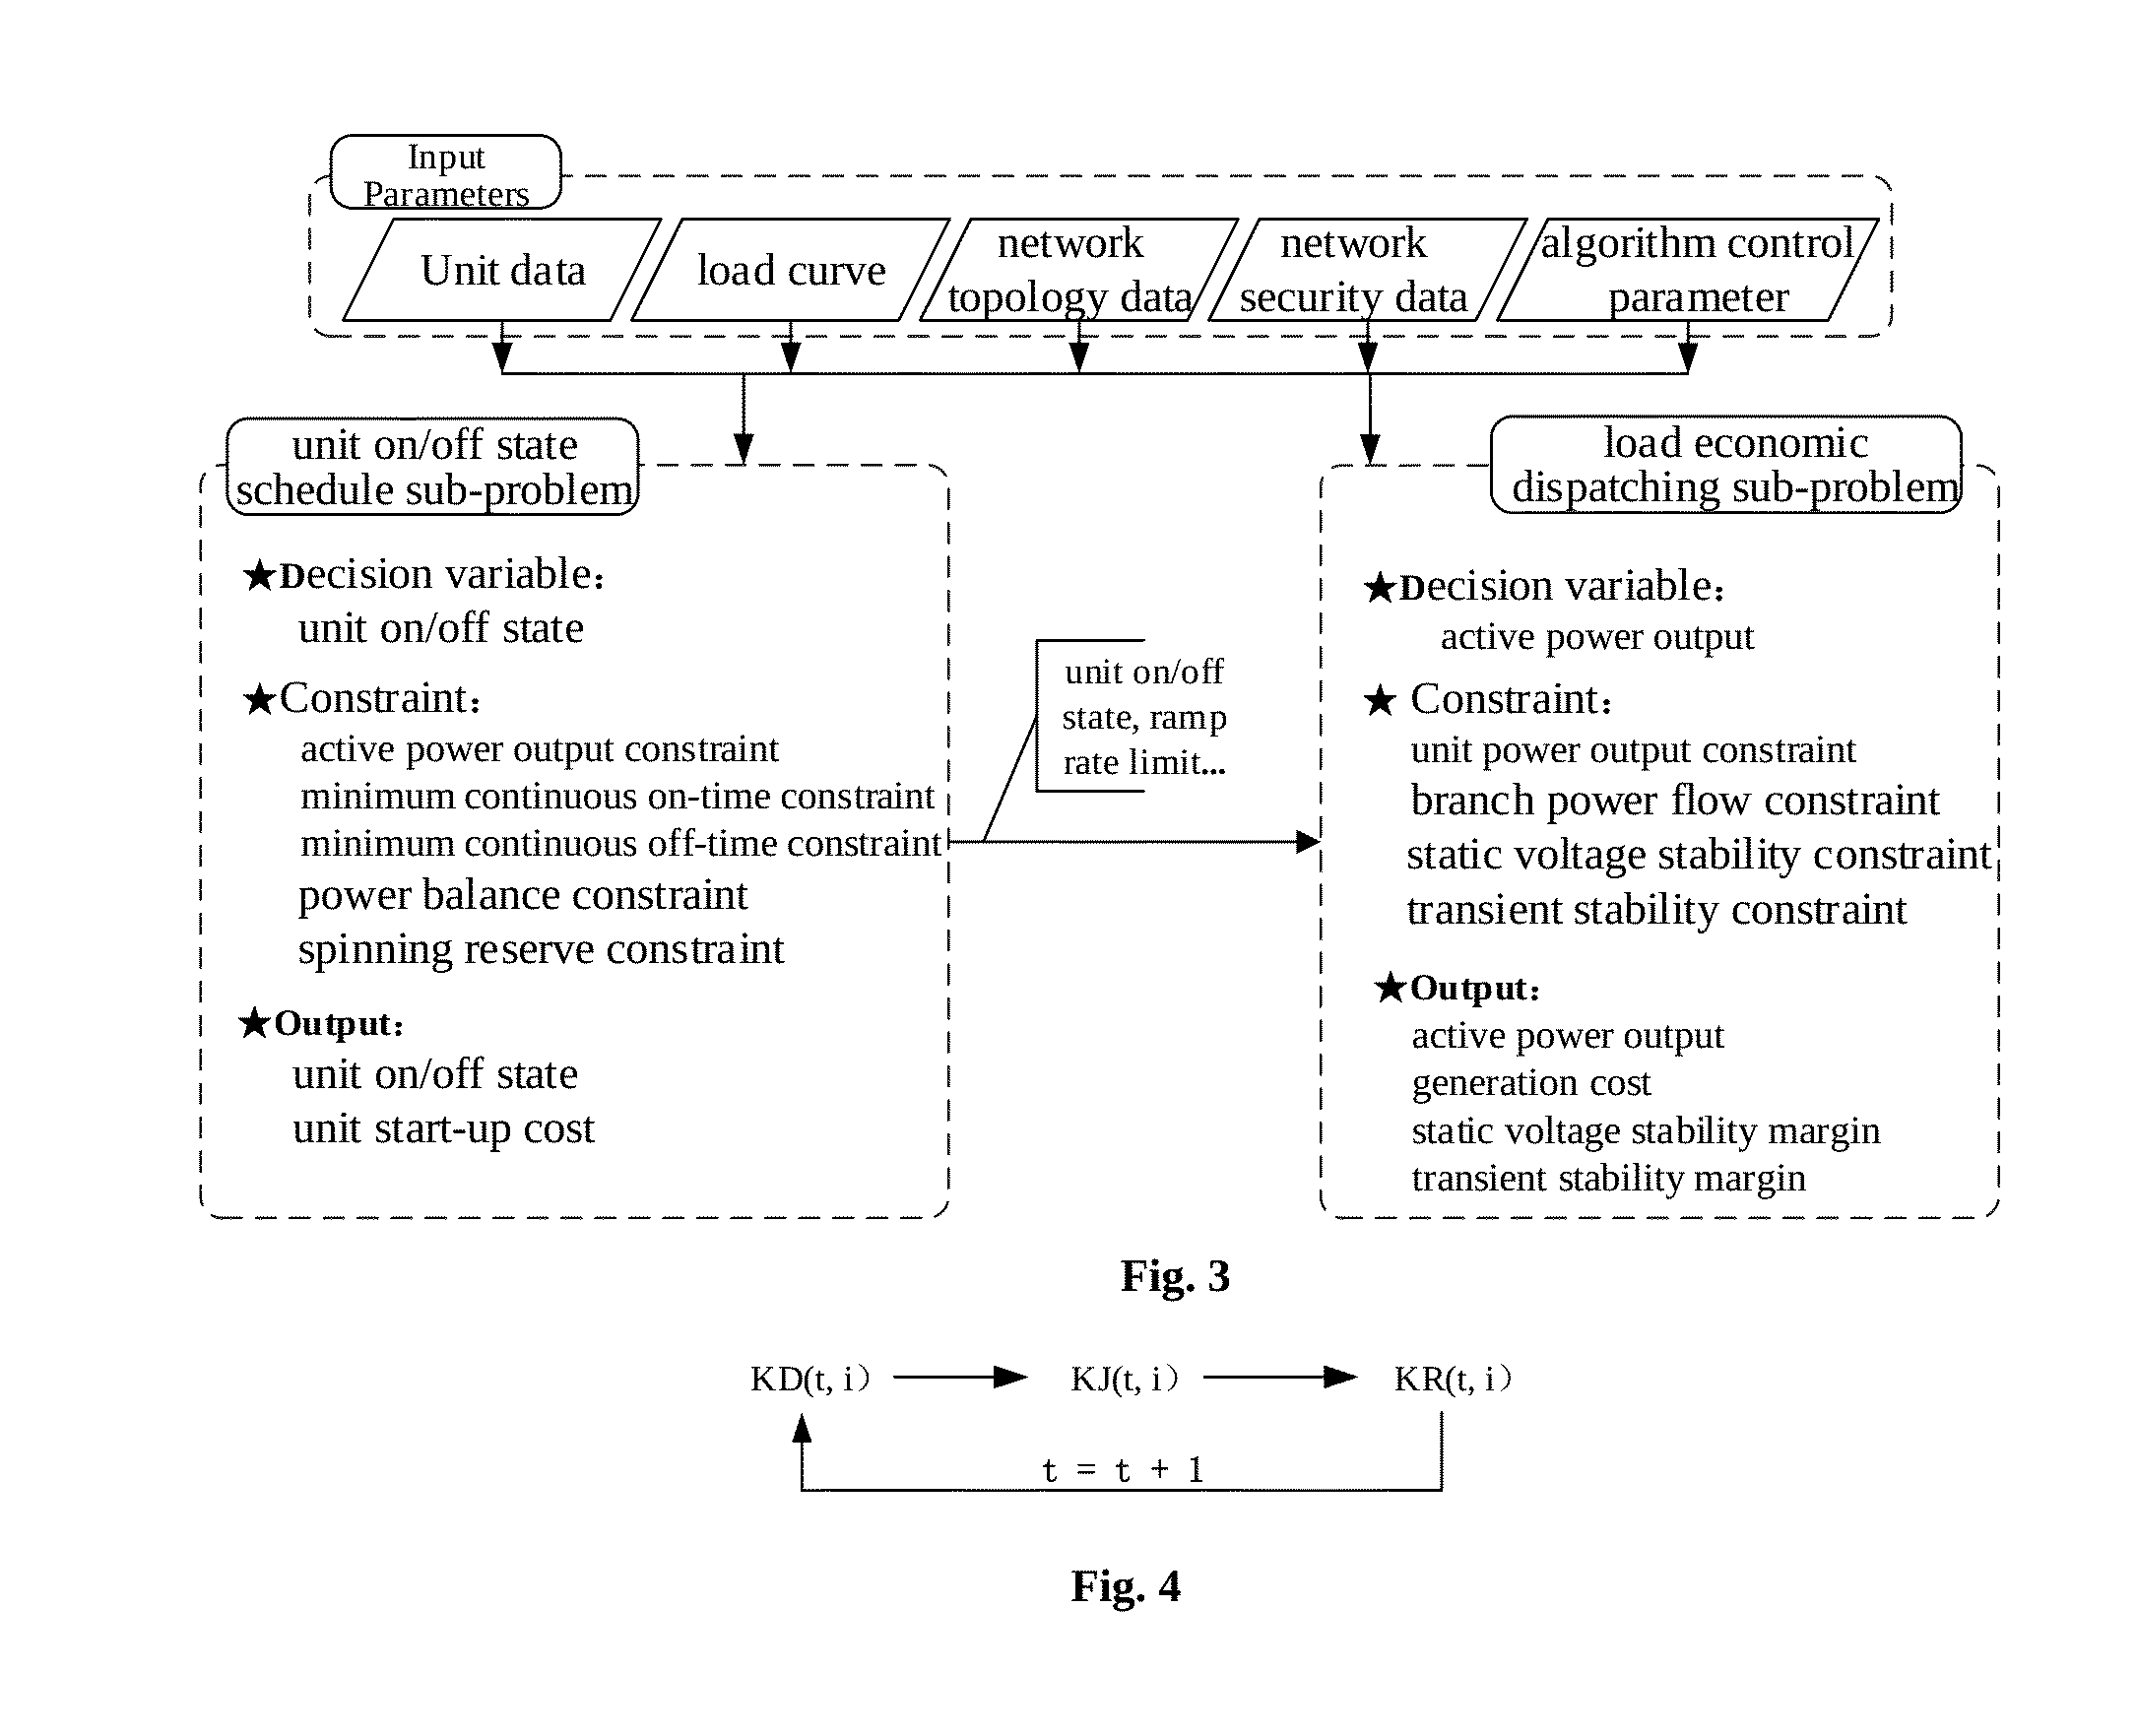 Security region based security-constrained economic dispatching method